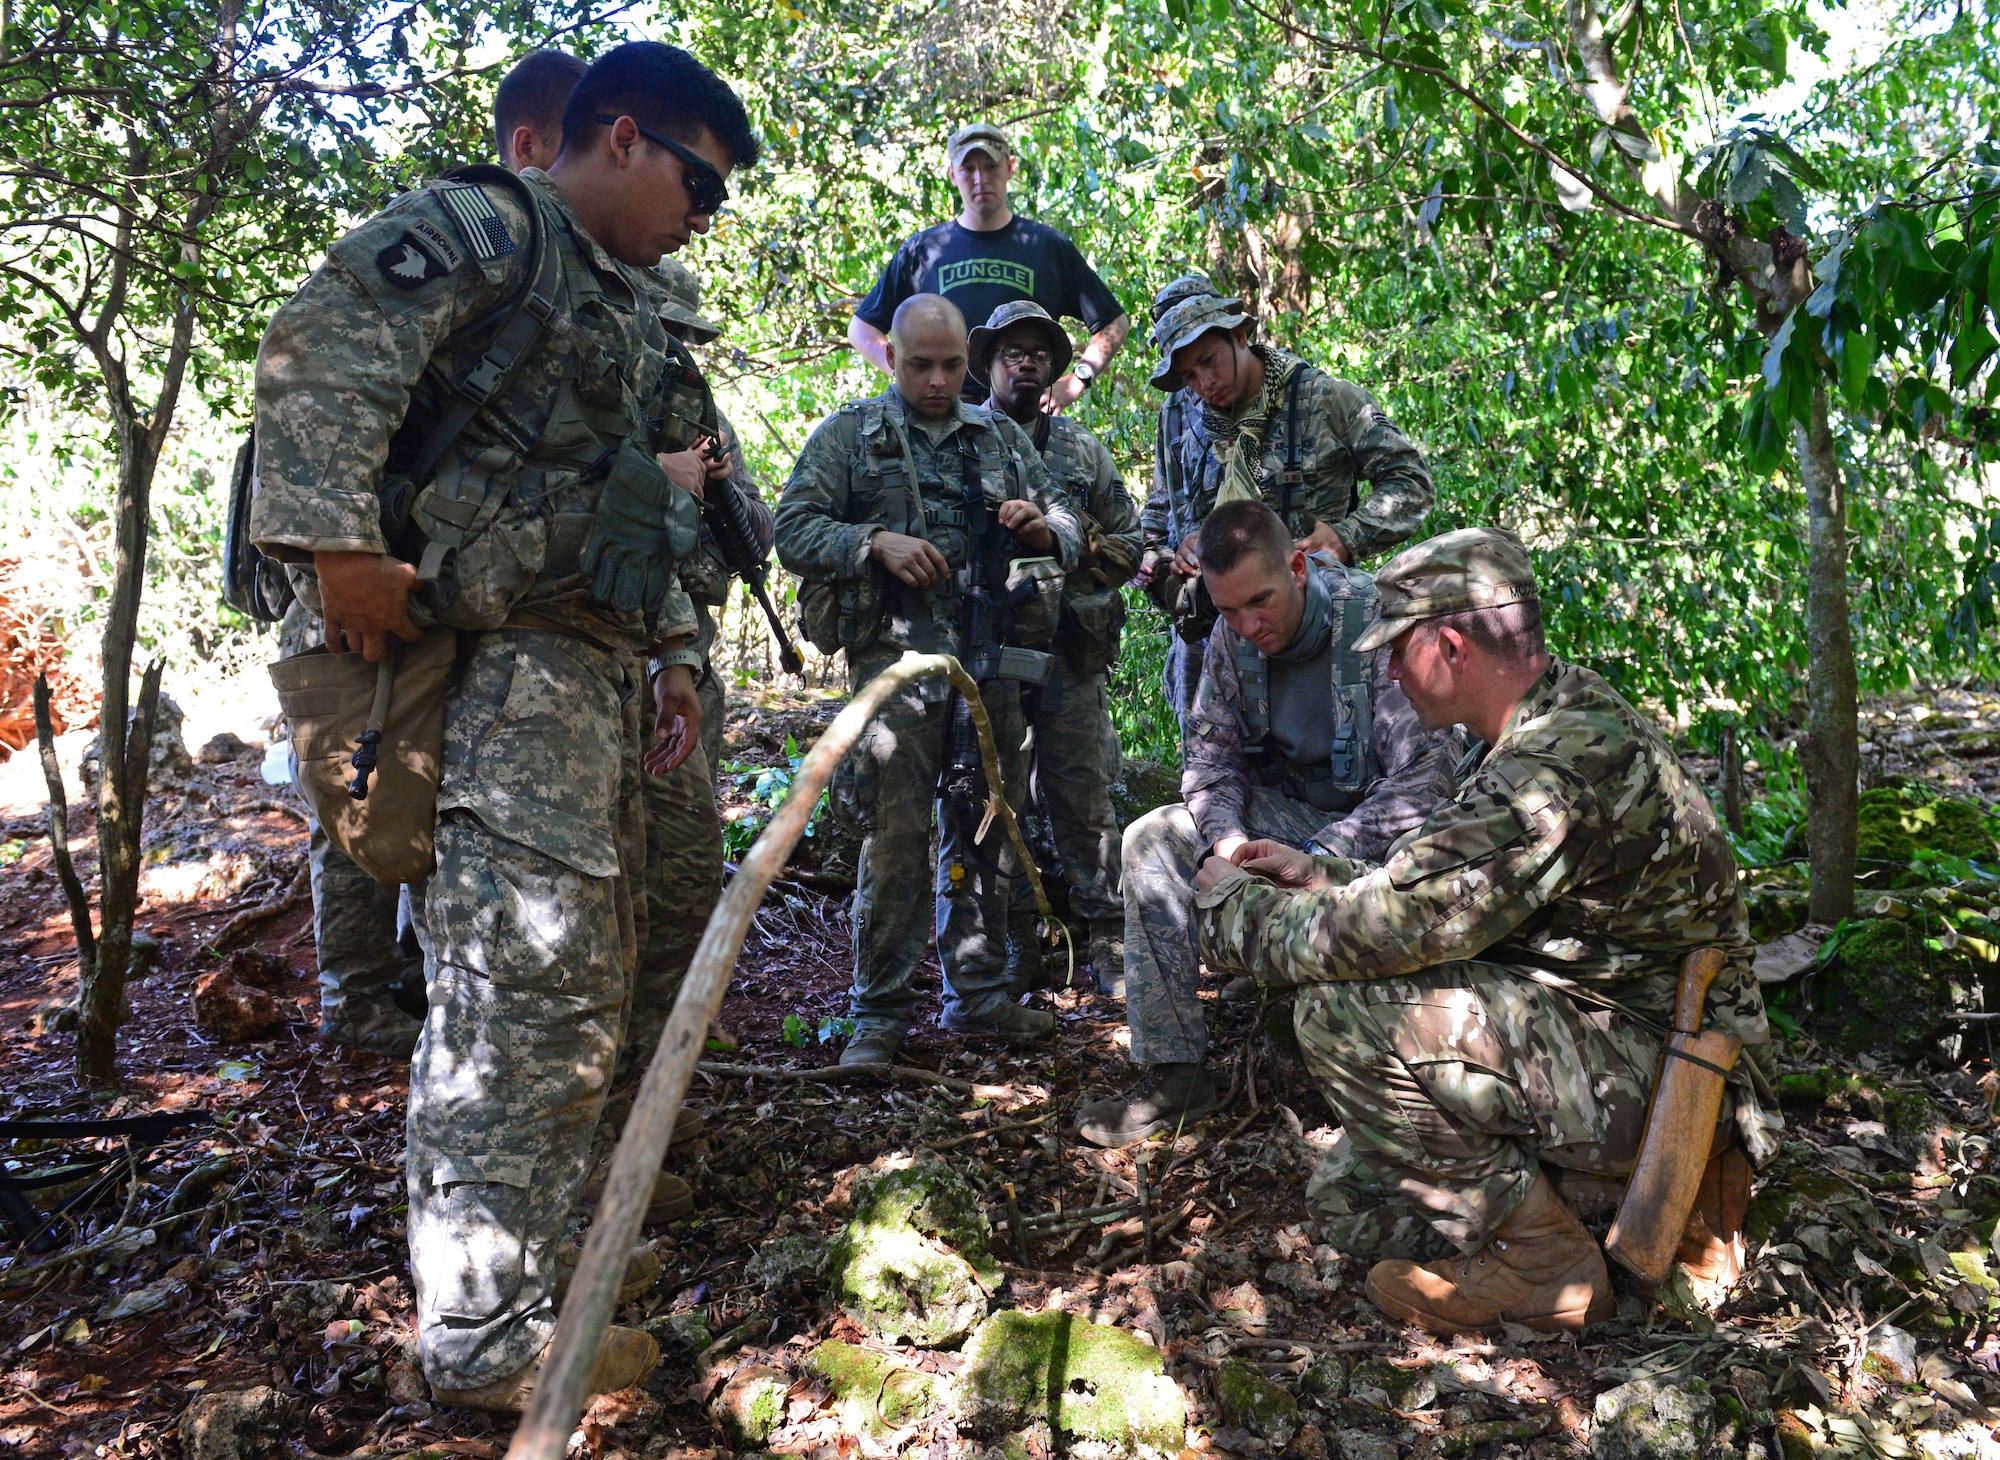 Airmen and Soldiers learn how to set animal traps and snares during the Jungle Training Operations Course June 17, 2016, at Andersen Air Force Base, Guam. From June 15-21, instructors from the U.S. Army 25th Infantry Division’s Lightning Academy Jungle Operations Training Center, in Schofield Barracks, Hawaii, travelled to Guam to teach more than 30 Airmen and Soldiers the fundamentals of fighting and surviving in jungles with support from cadre members of the 736th Security Forces Squadron. (U.S. Air Force photo by Senior Airman Joshua Smoot)